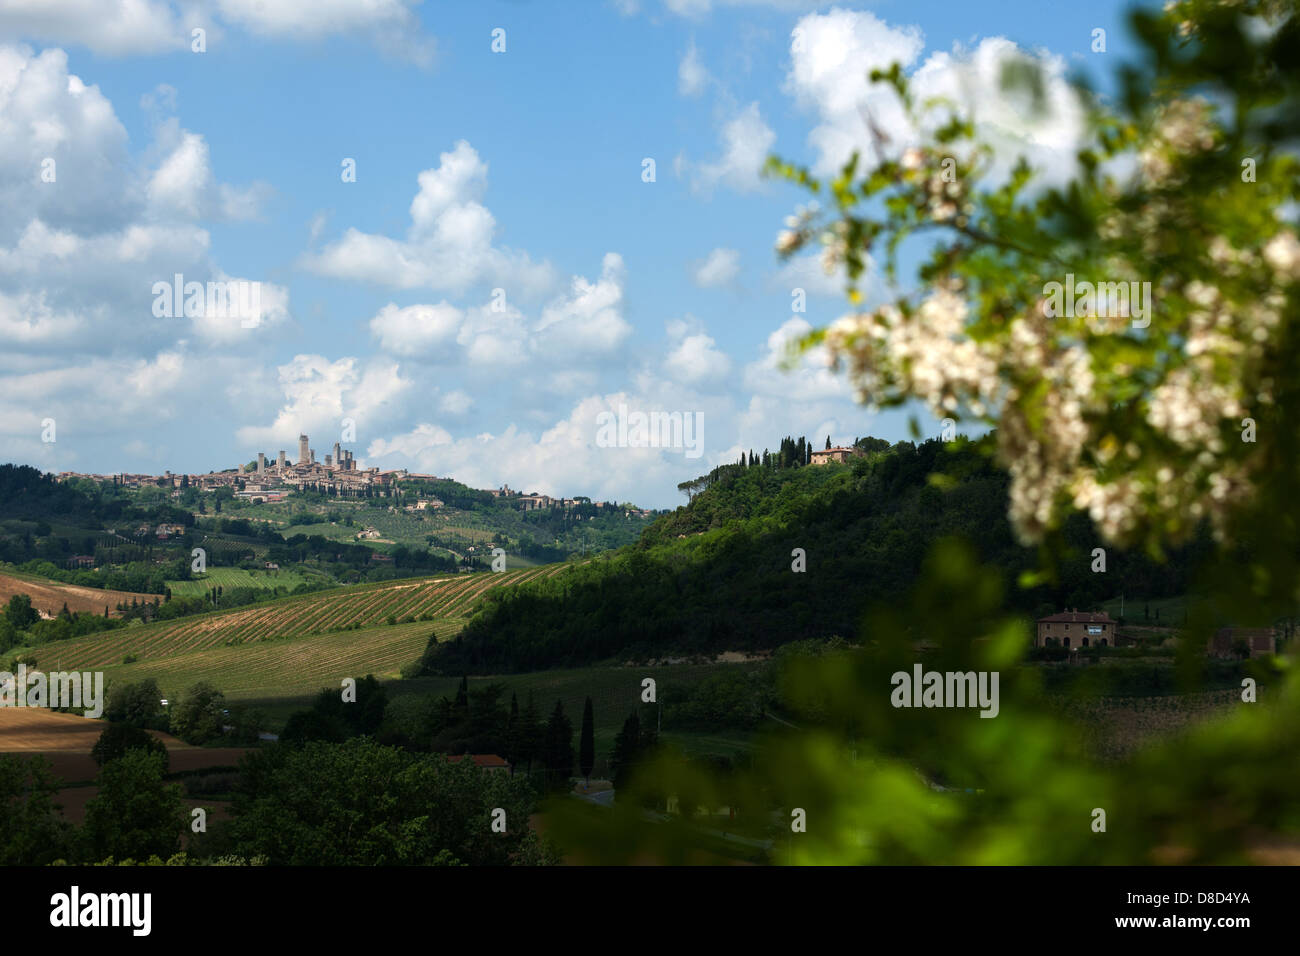 The extensive hilly landscape of Tuscany with Medieval hilltop town of San Gimignano, Tuscany, Italy, Europe Stock Photo